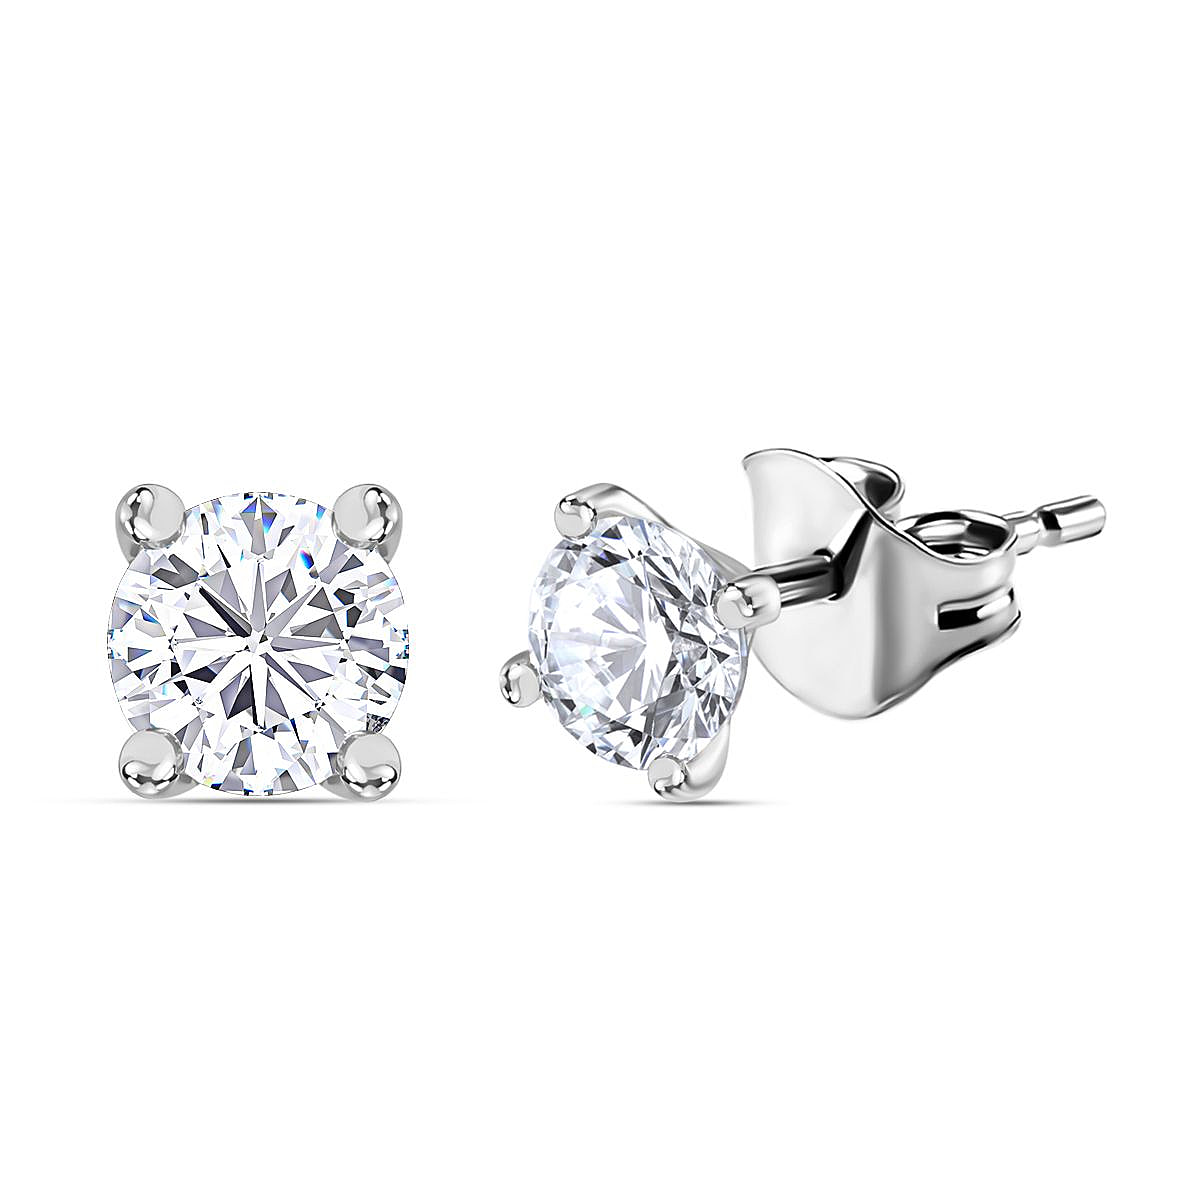 100 Faceted Moissanite Solitaire Earrings in Platinum Overlay Sterling Silver 1.00 ct